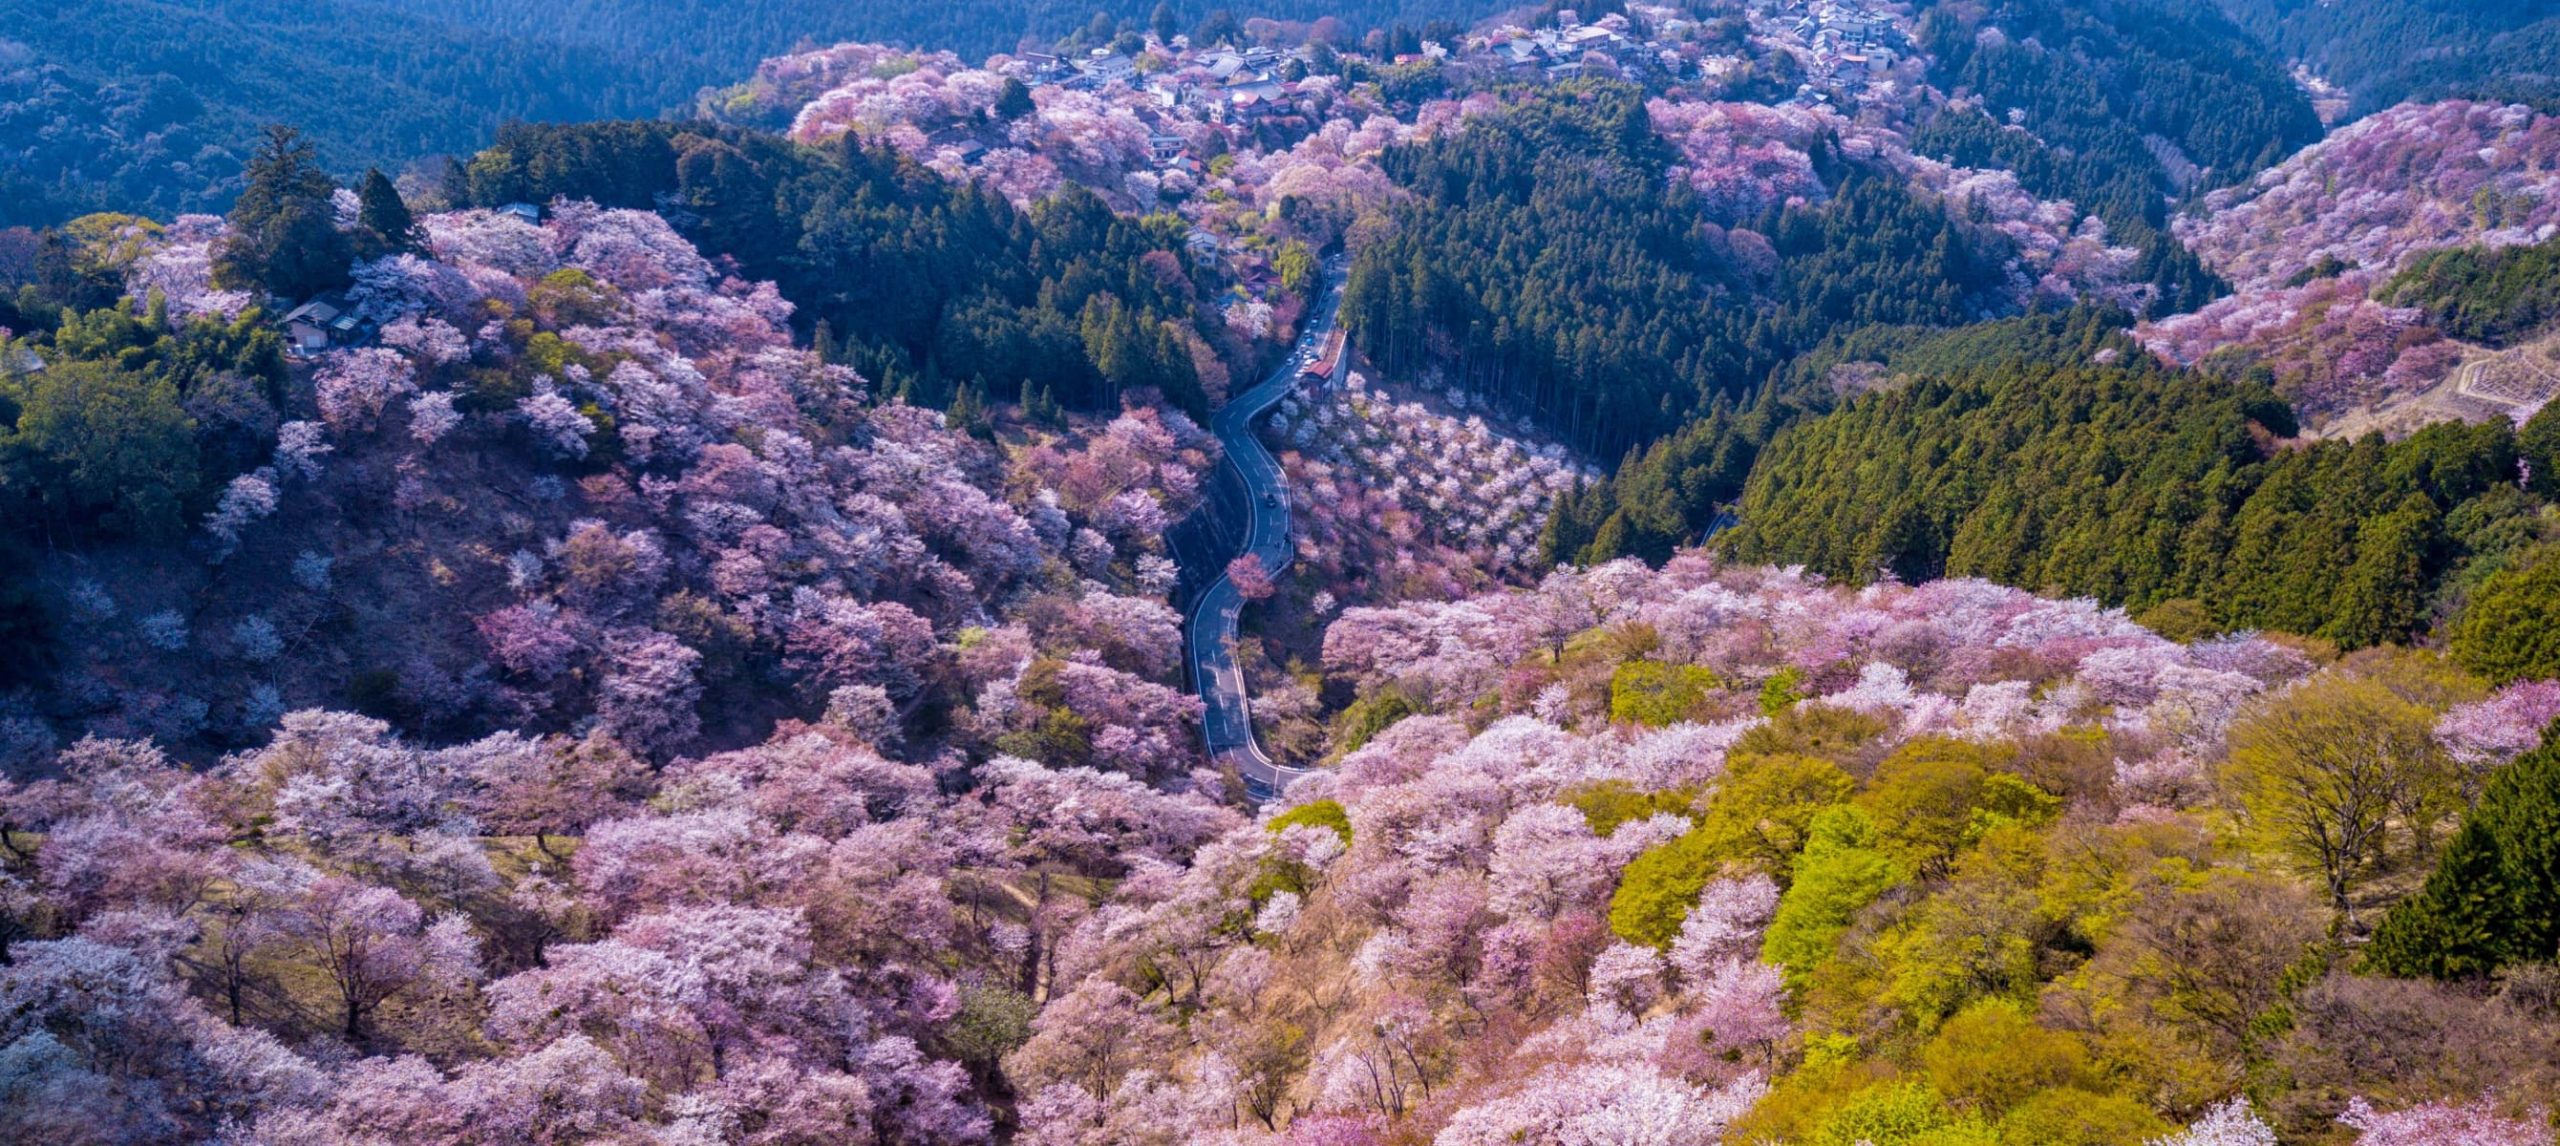 The 6 Best Places to See Cherry Blossoms in Nara, Japan